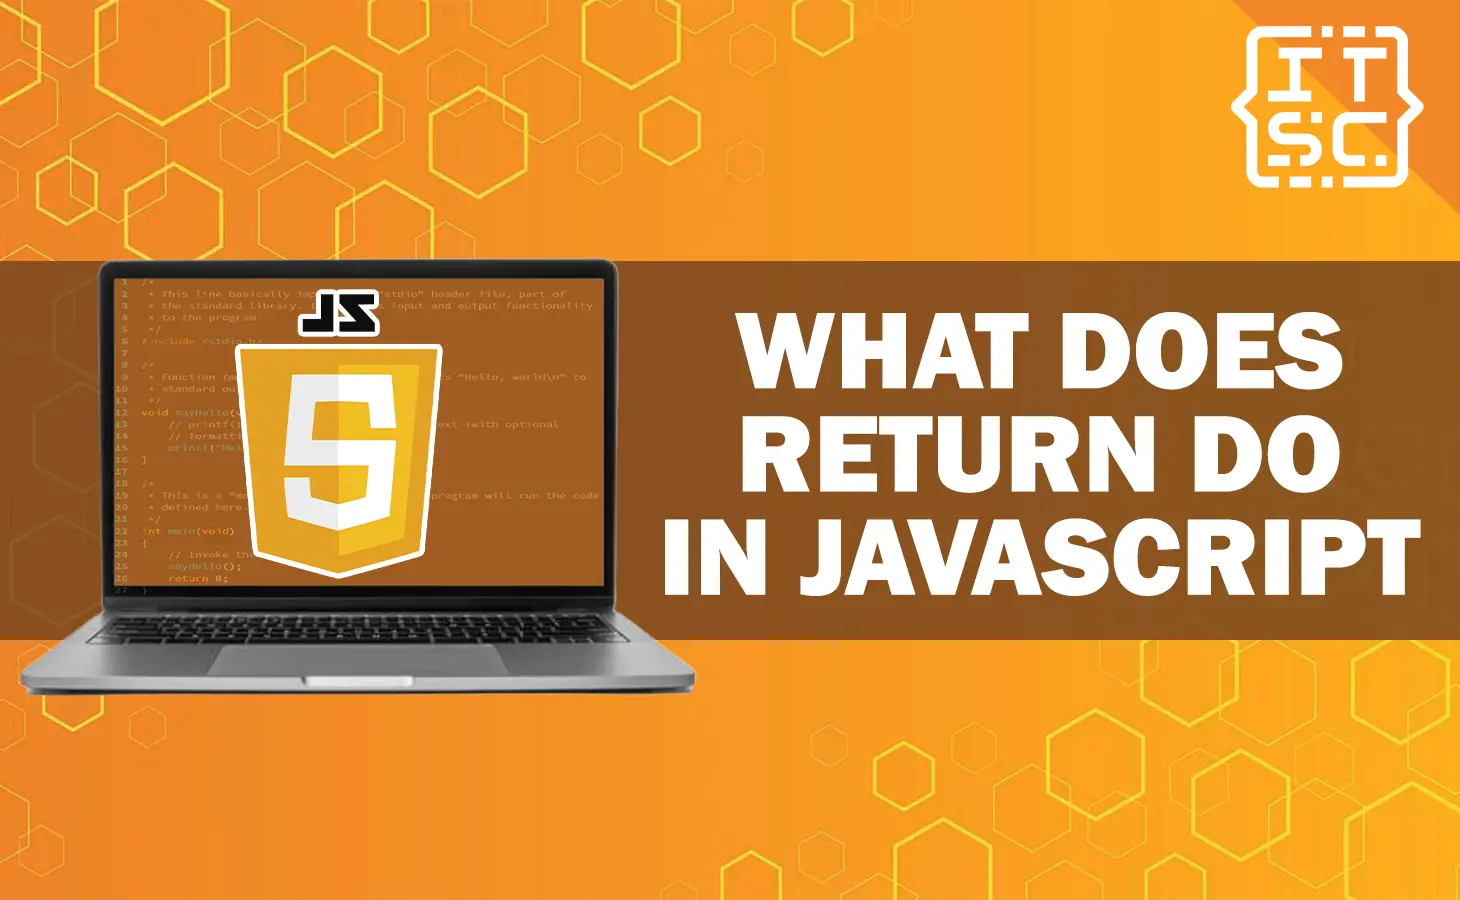 What Does Return Do in JavaScript